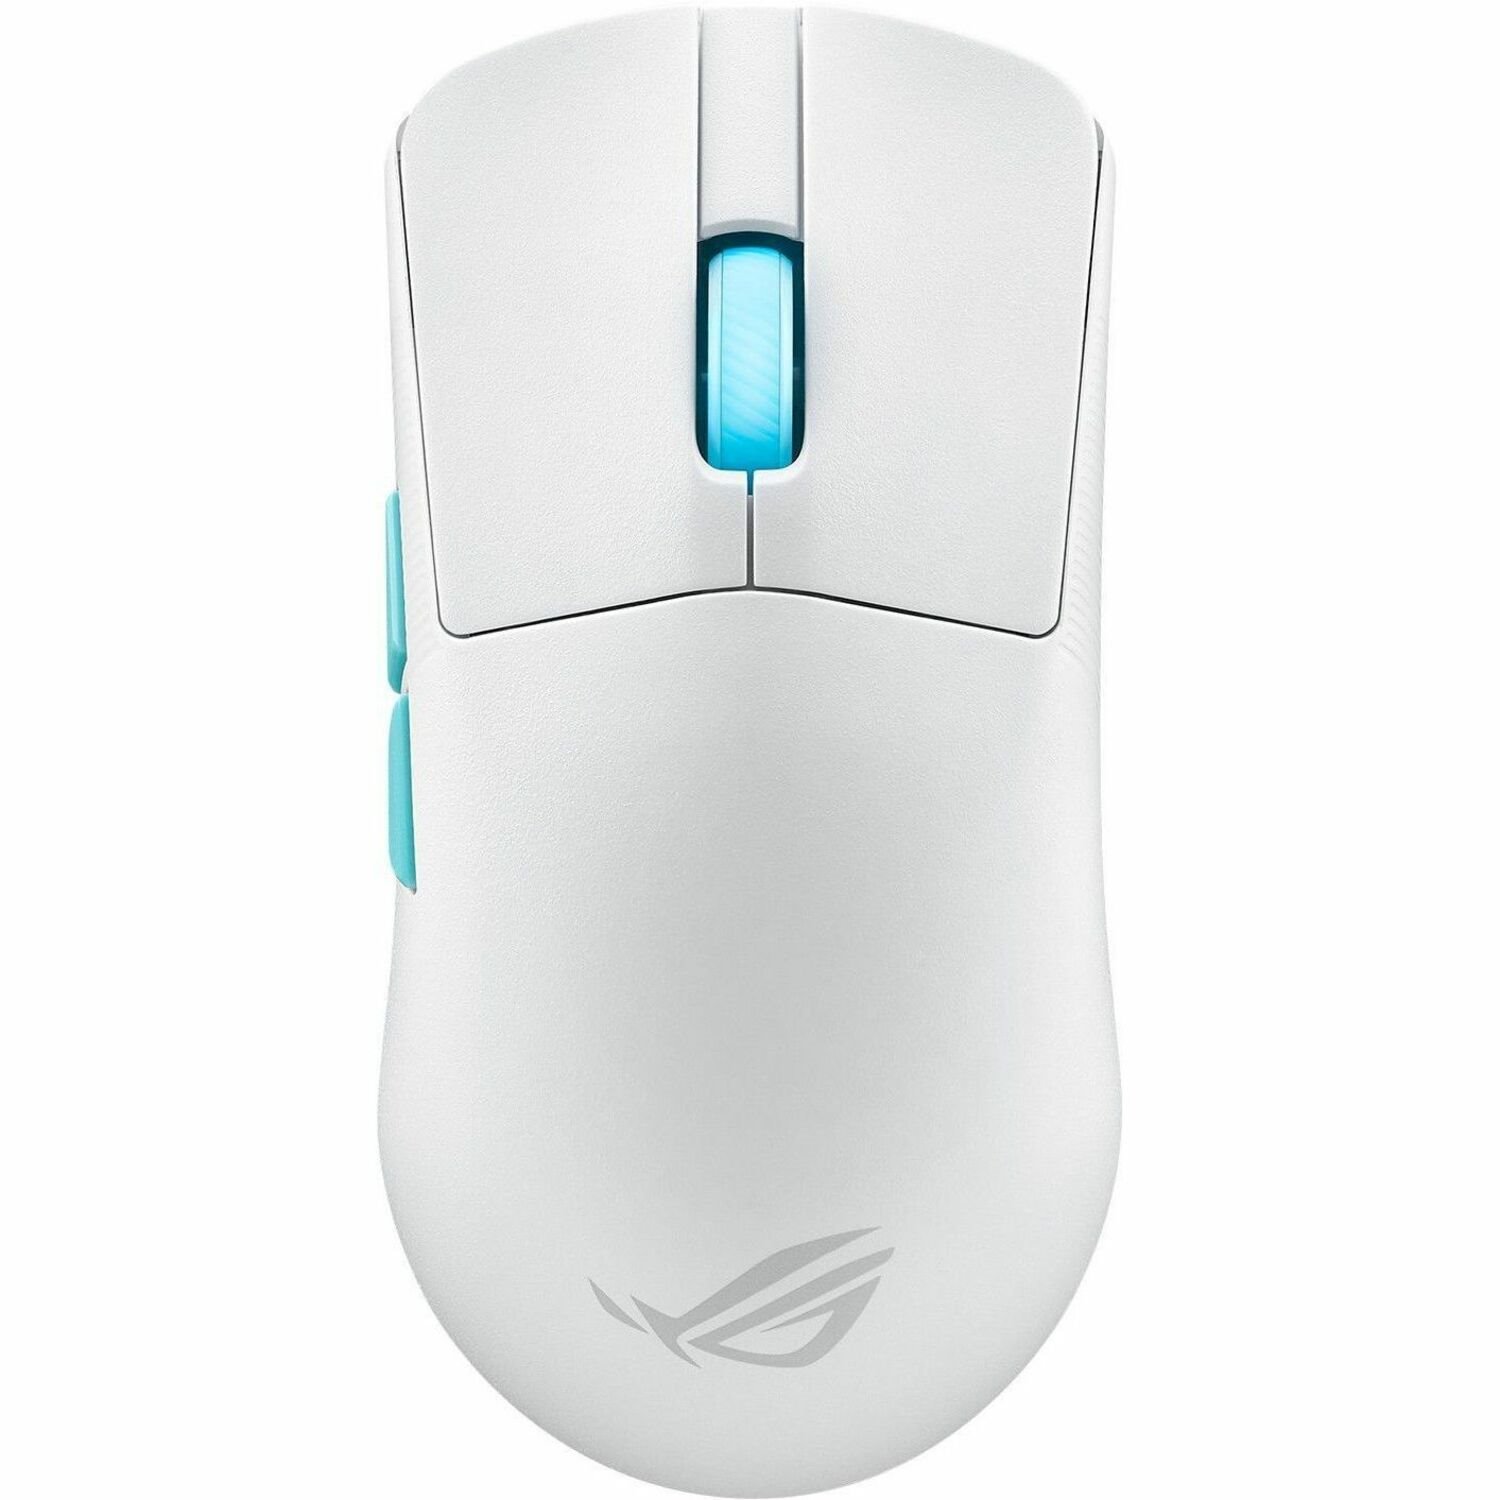 Asus ROG Harpe Ace Aim Lab Edition Gaming Mouse - Bluetooth/Radio Frequency - USB 2.0 - Optical - 5 Button(s) - White - 1